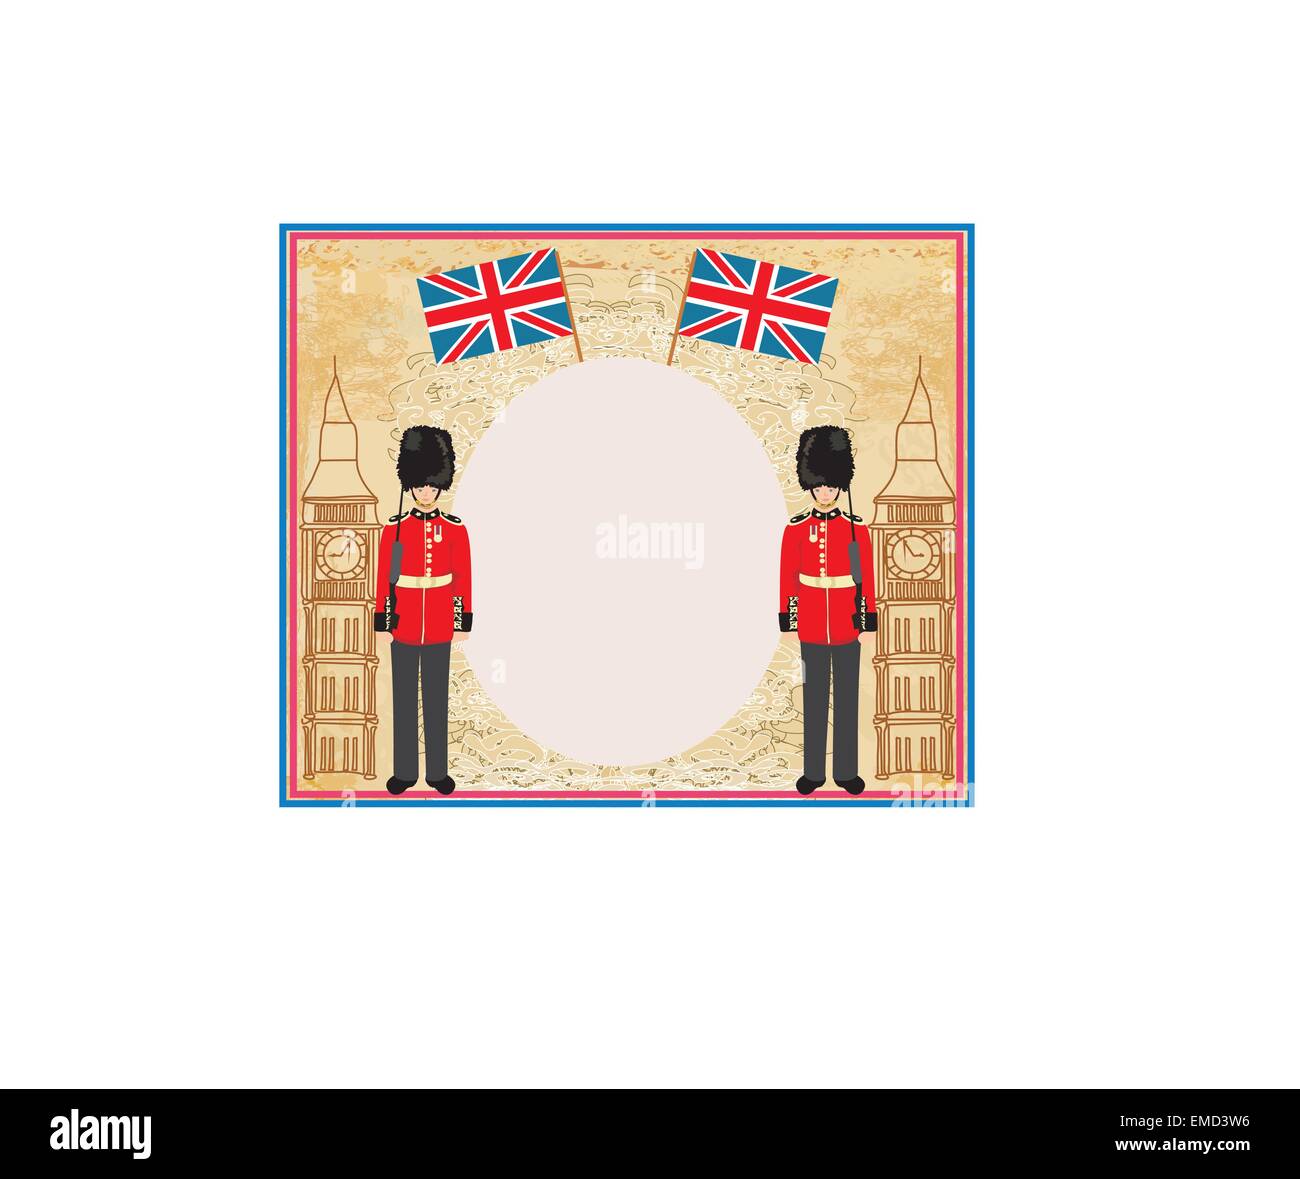 Abstract frame with a flag,Beefeater soldier and Big Ben Stock Vector